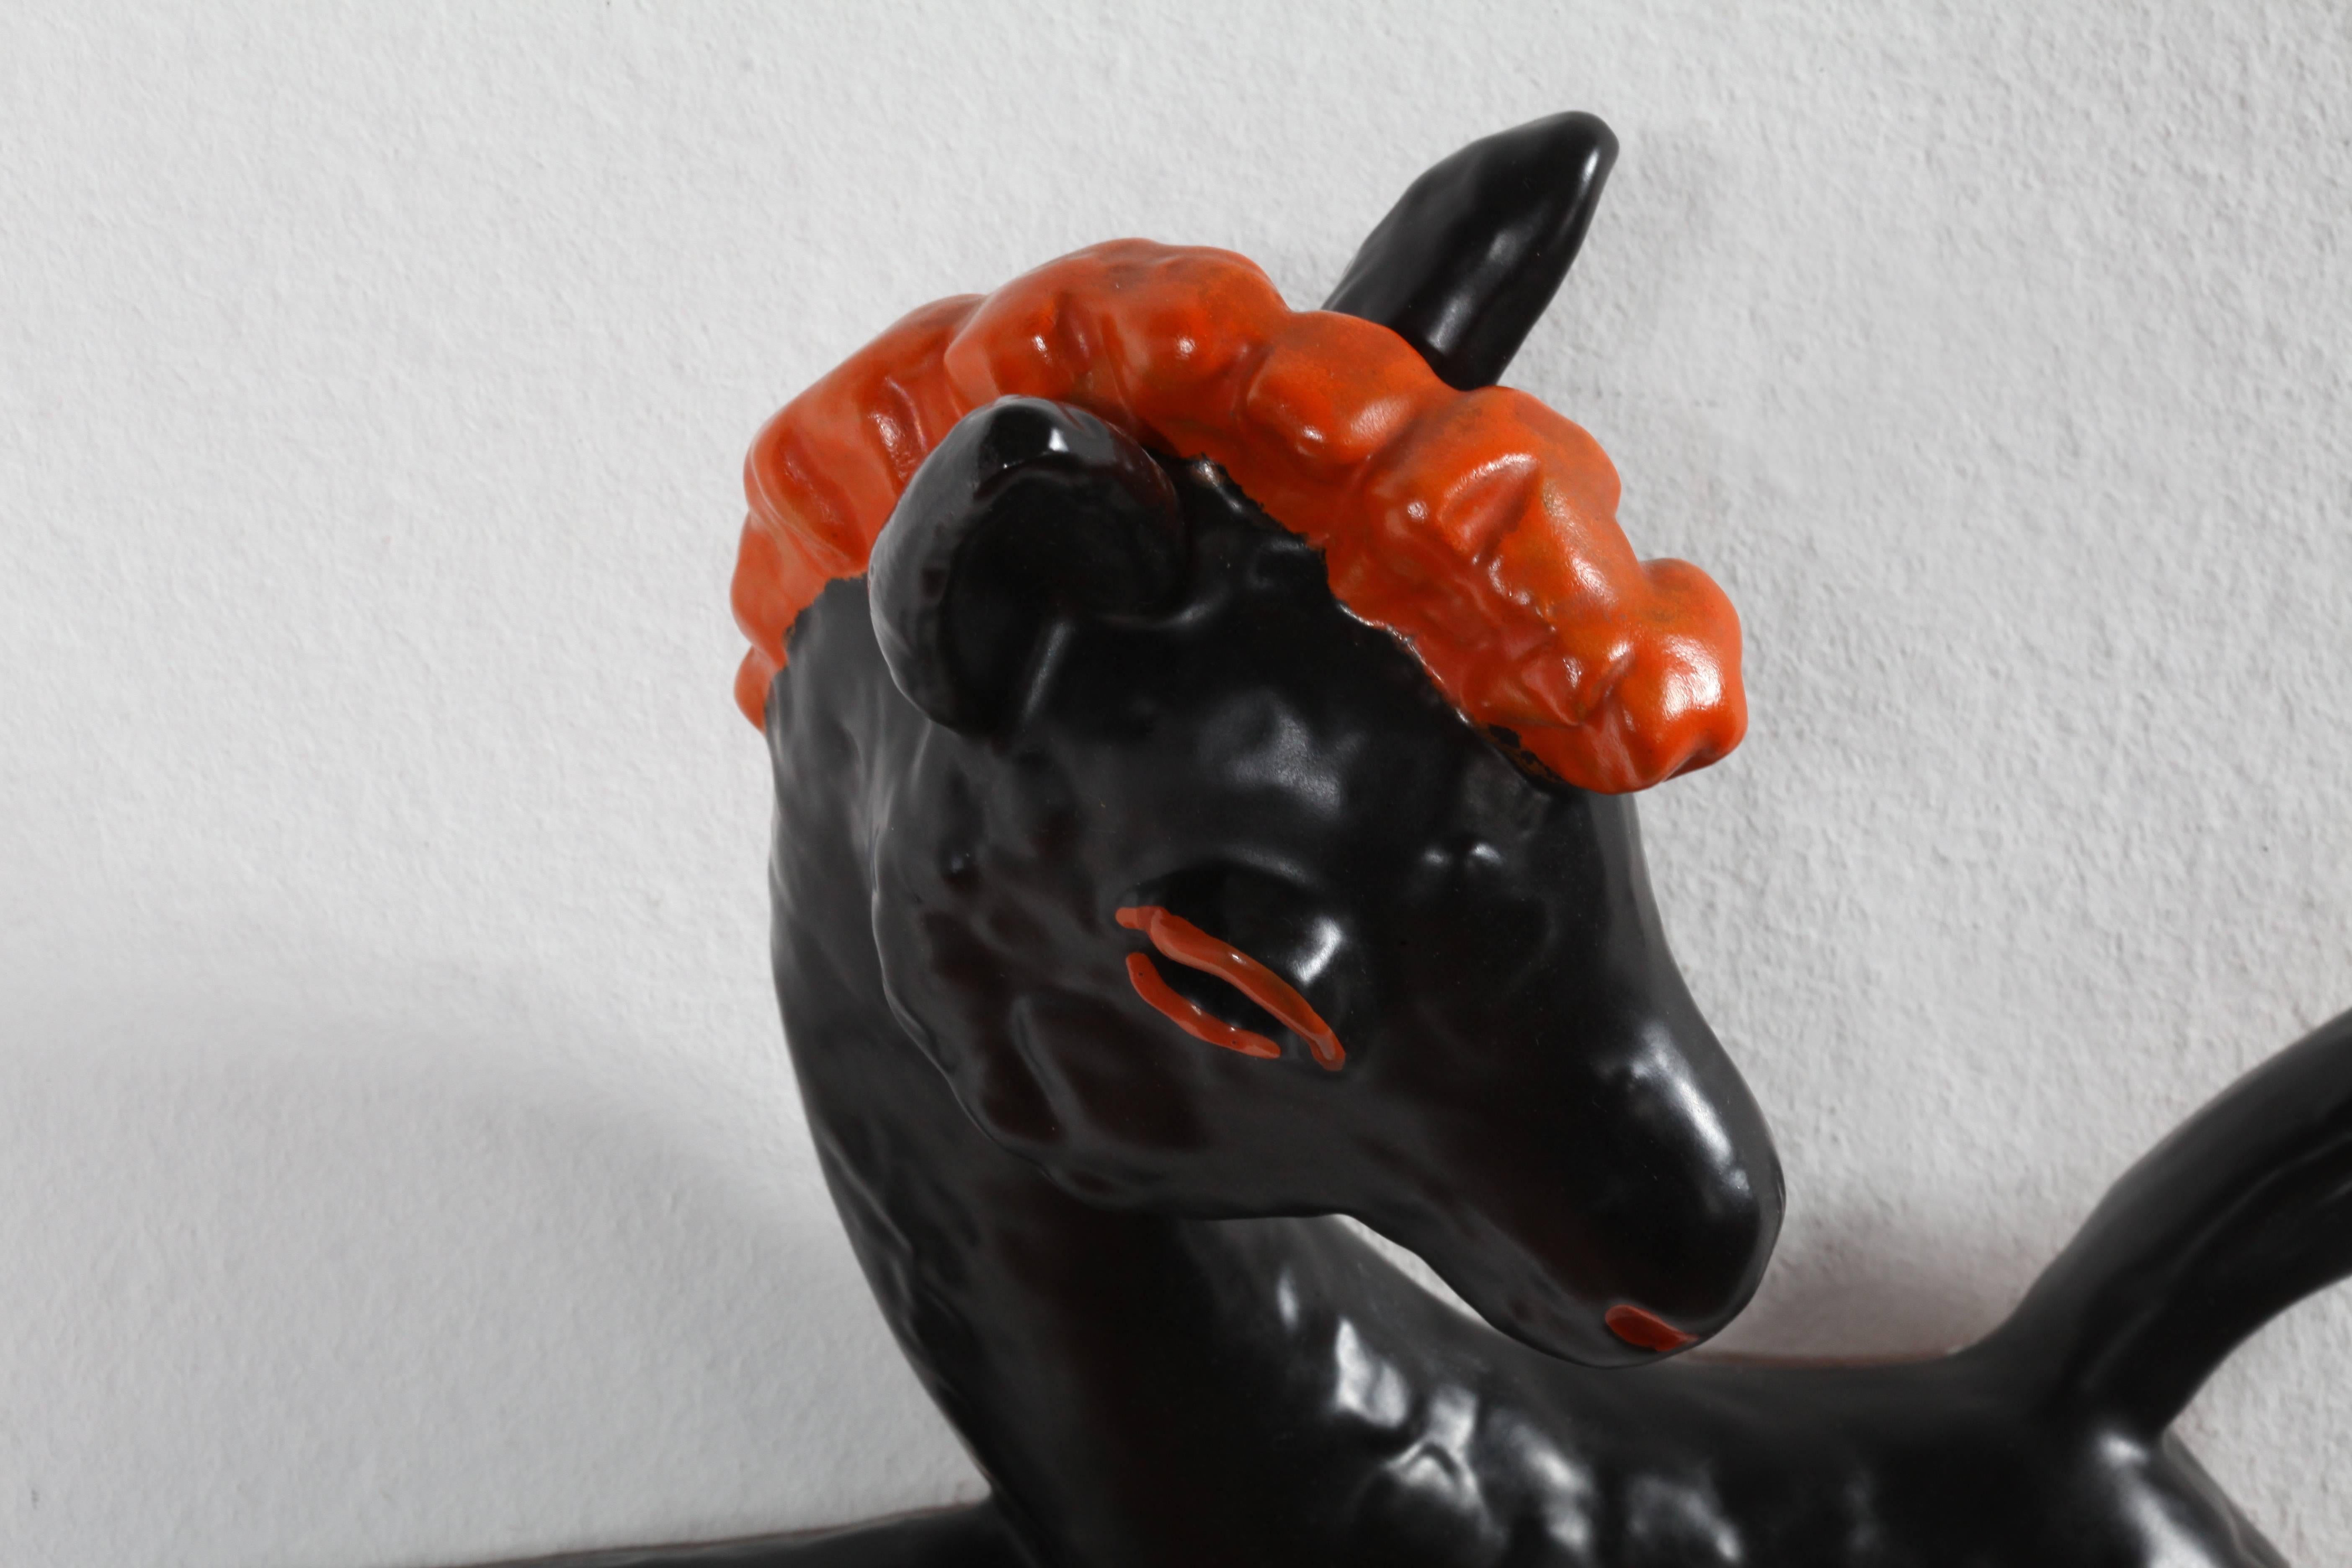 Ceramic horse.
Manufacturer- Goldscheider.
Germany, 1950.
Two color.
Measures: Width 14 inch (34cm).
Height 11 inch (28cm).
Depth 5 inch (12cm).